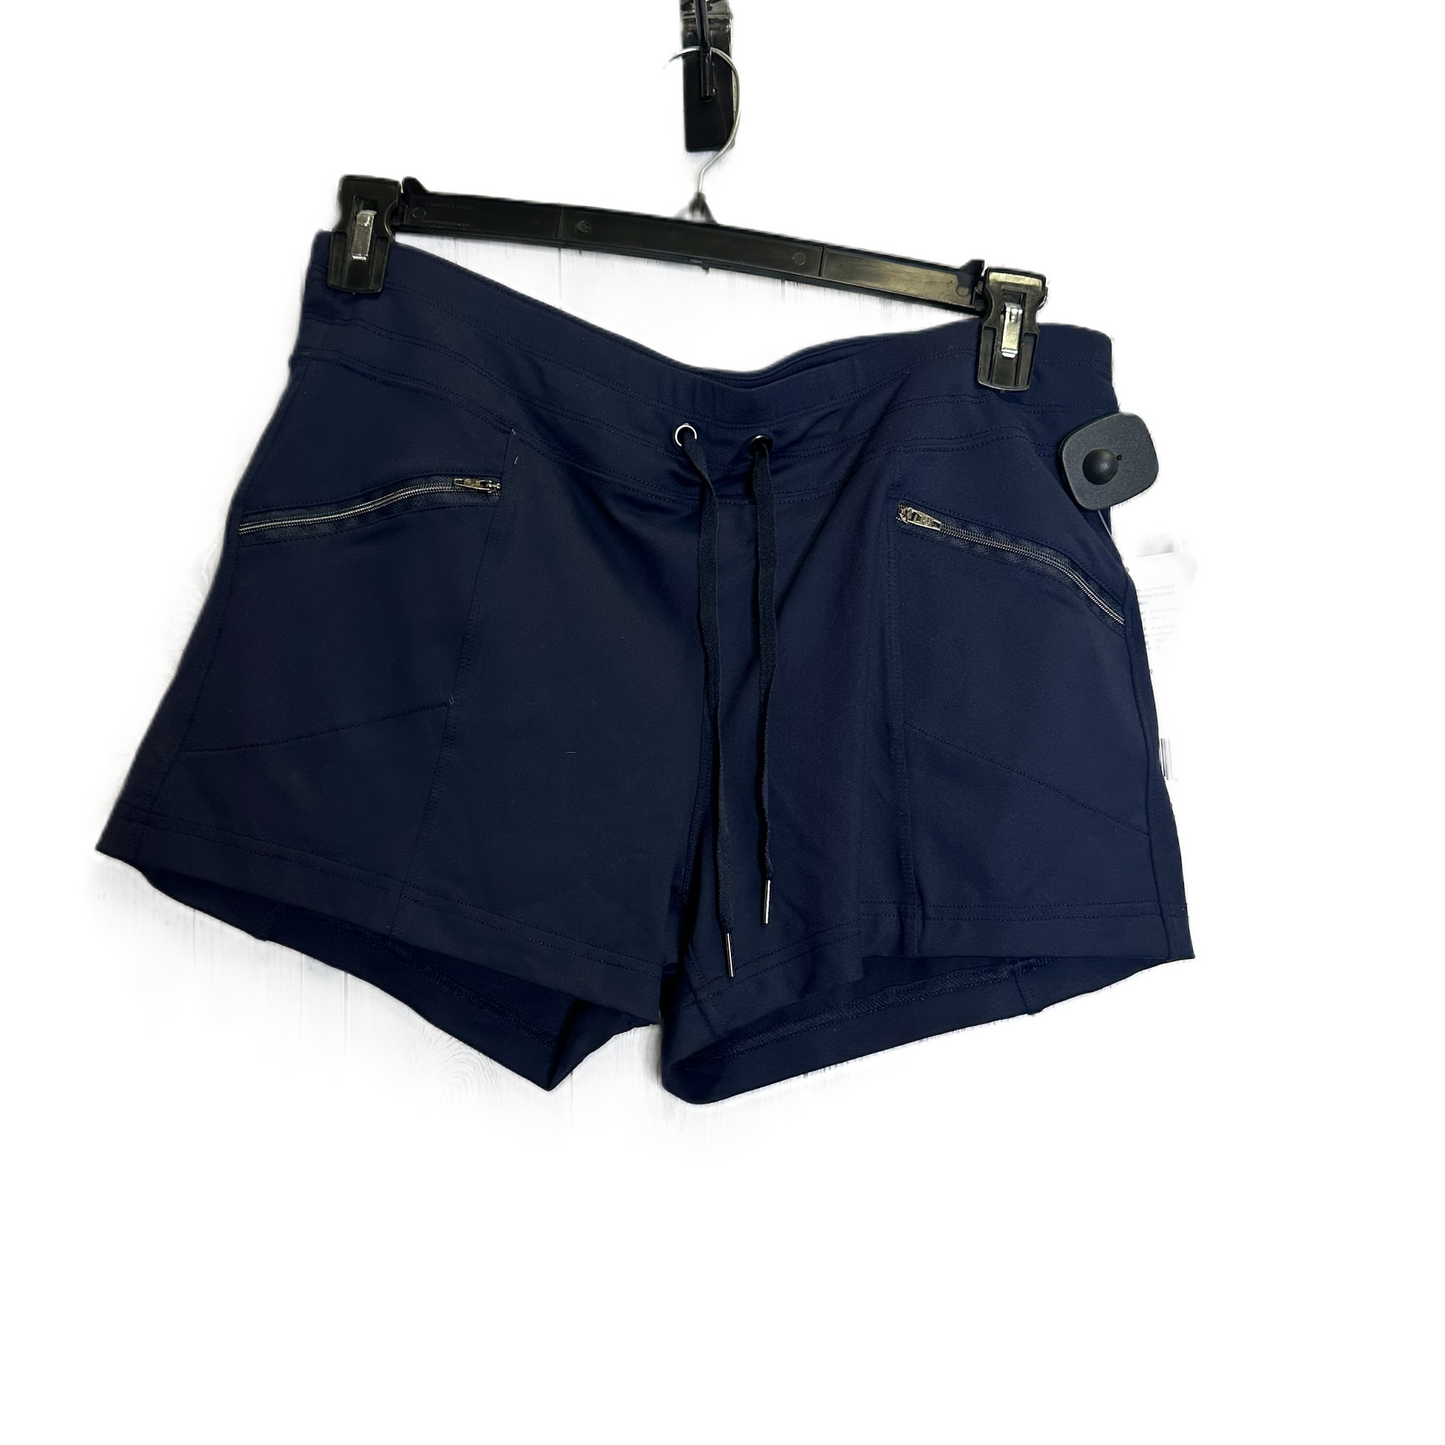 Navy Athletic Shorts By Active Life, Size: L